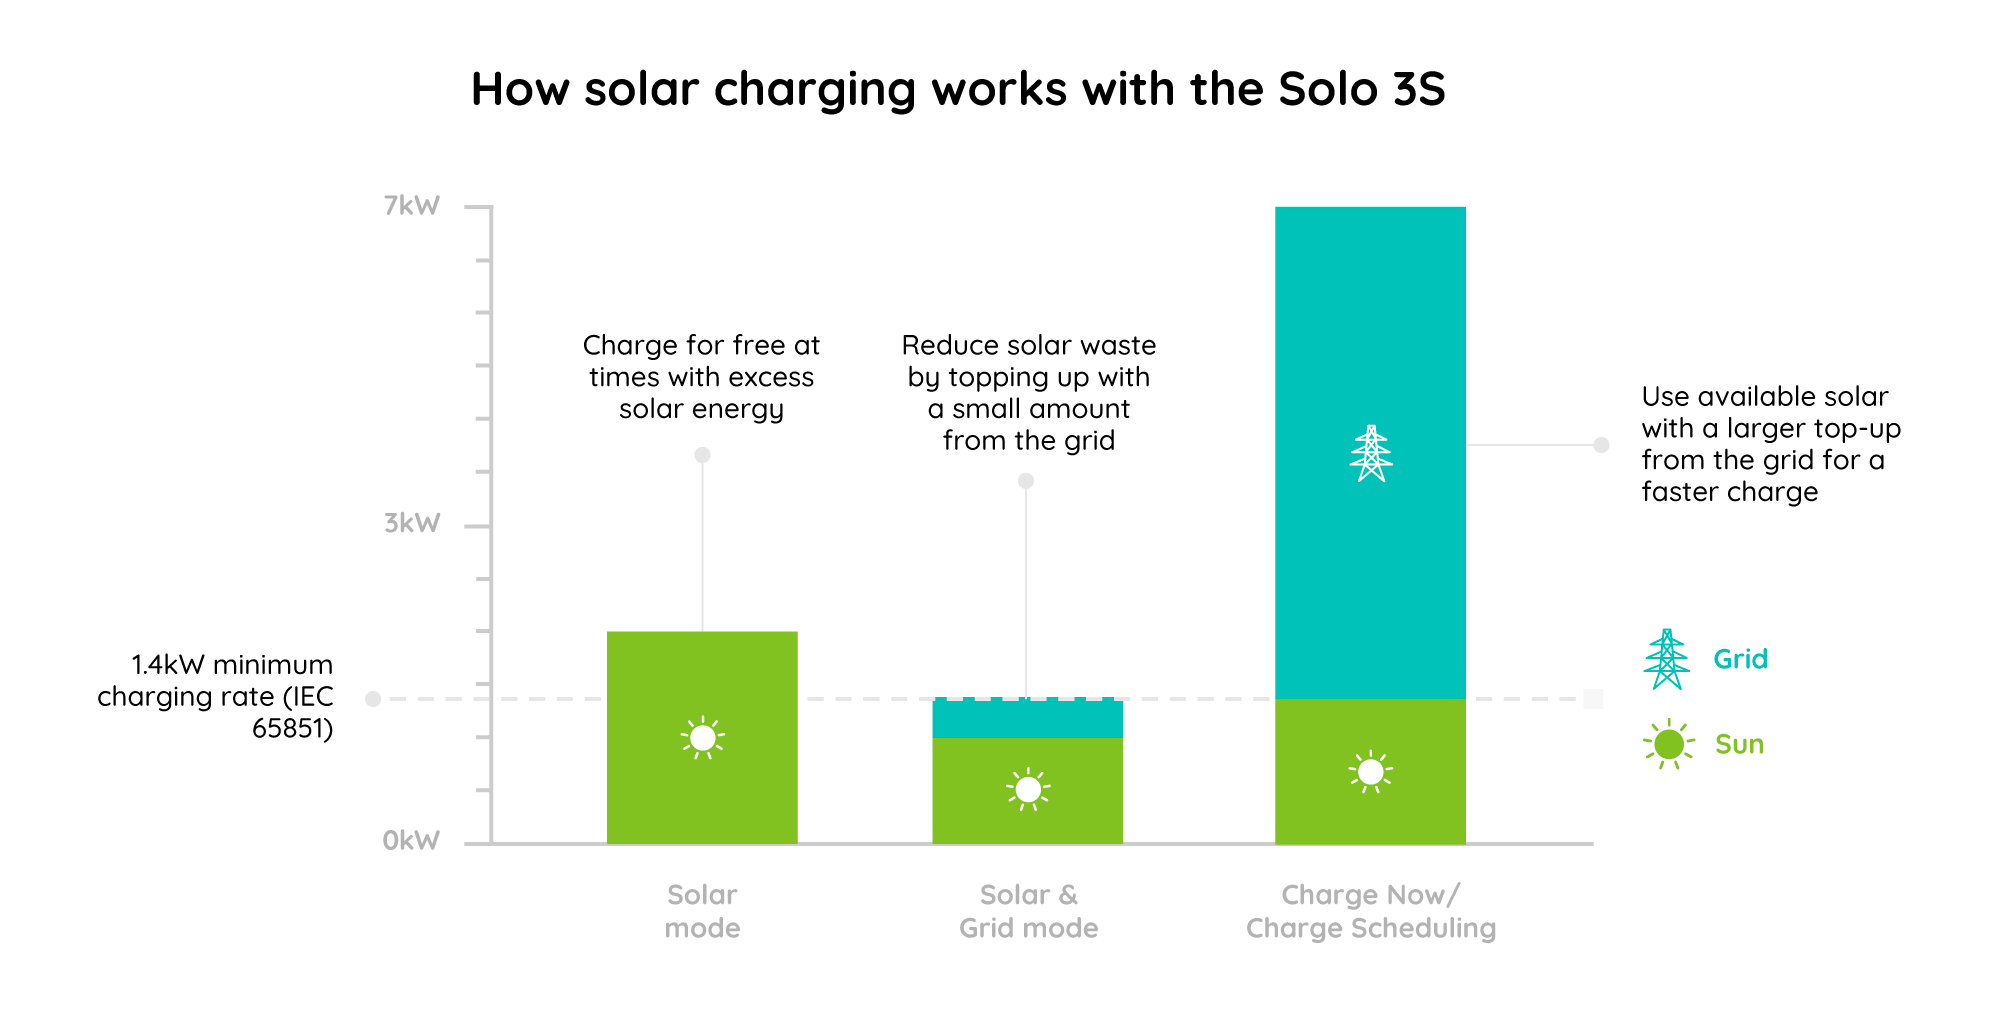 Infographic showing how different solar charging modes work